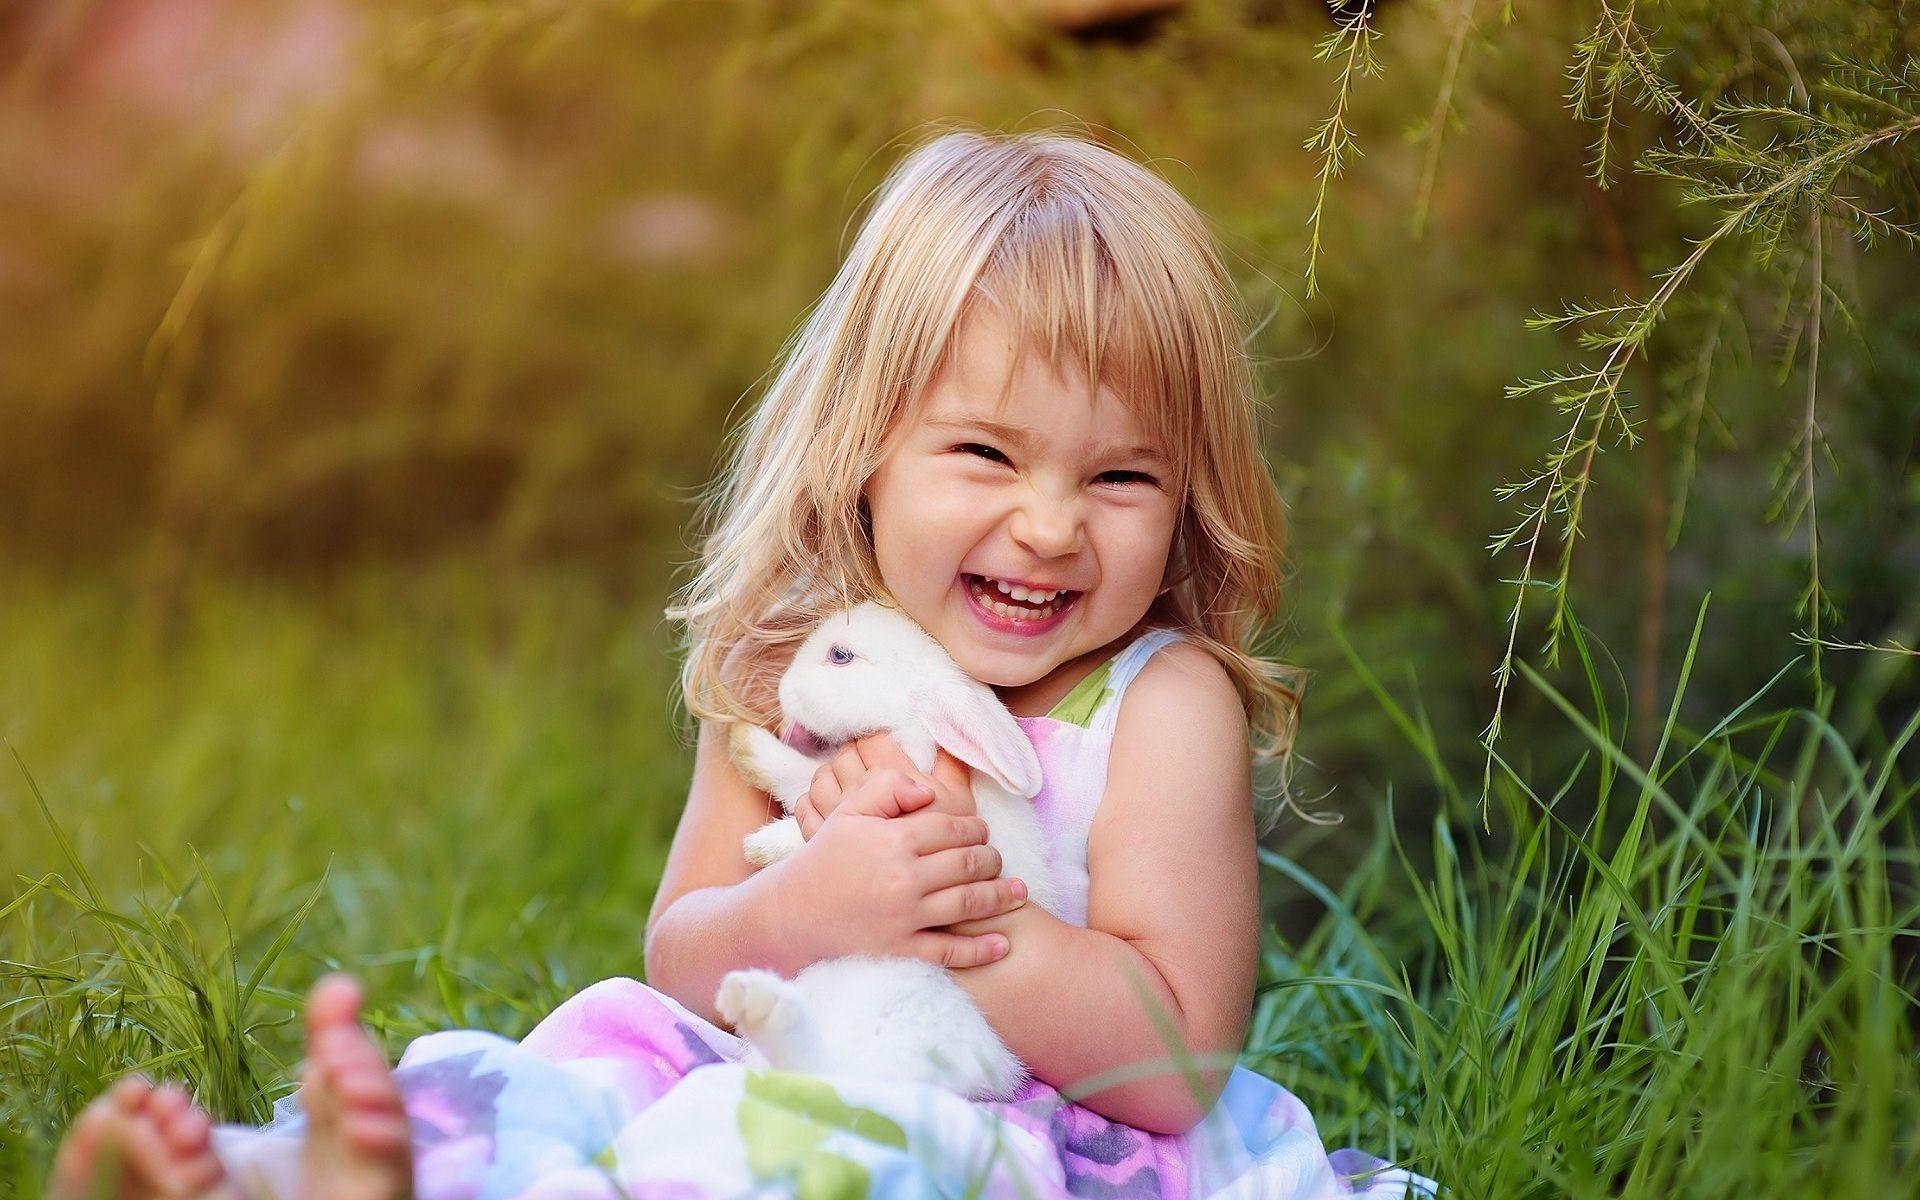 Cute Smiling Child Girl With Rabbit Wallpaper Series. Cute baby wallpaper, Baby wallpaper, Cute babies